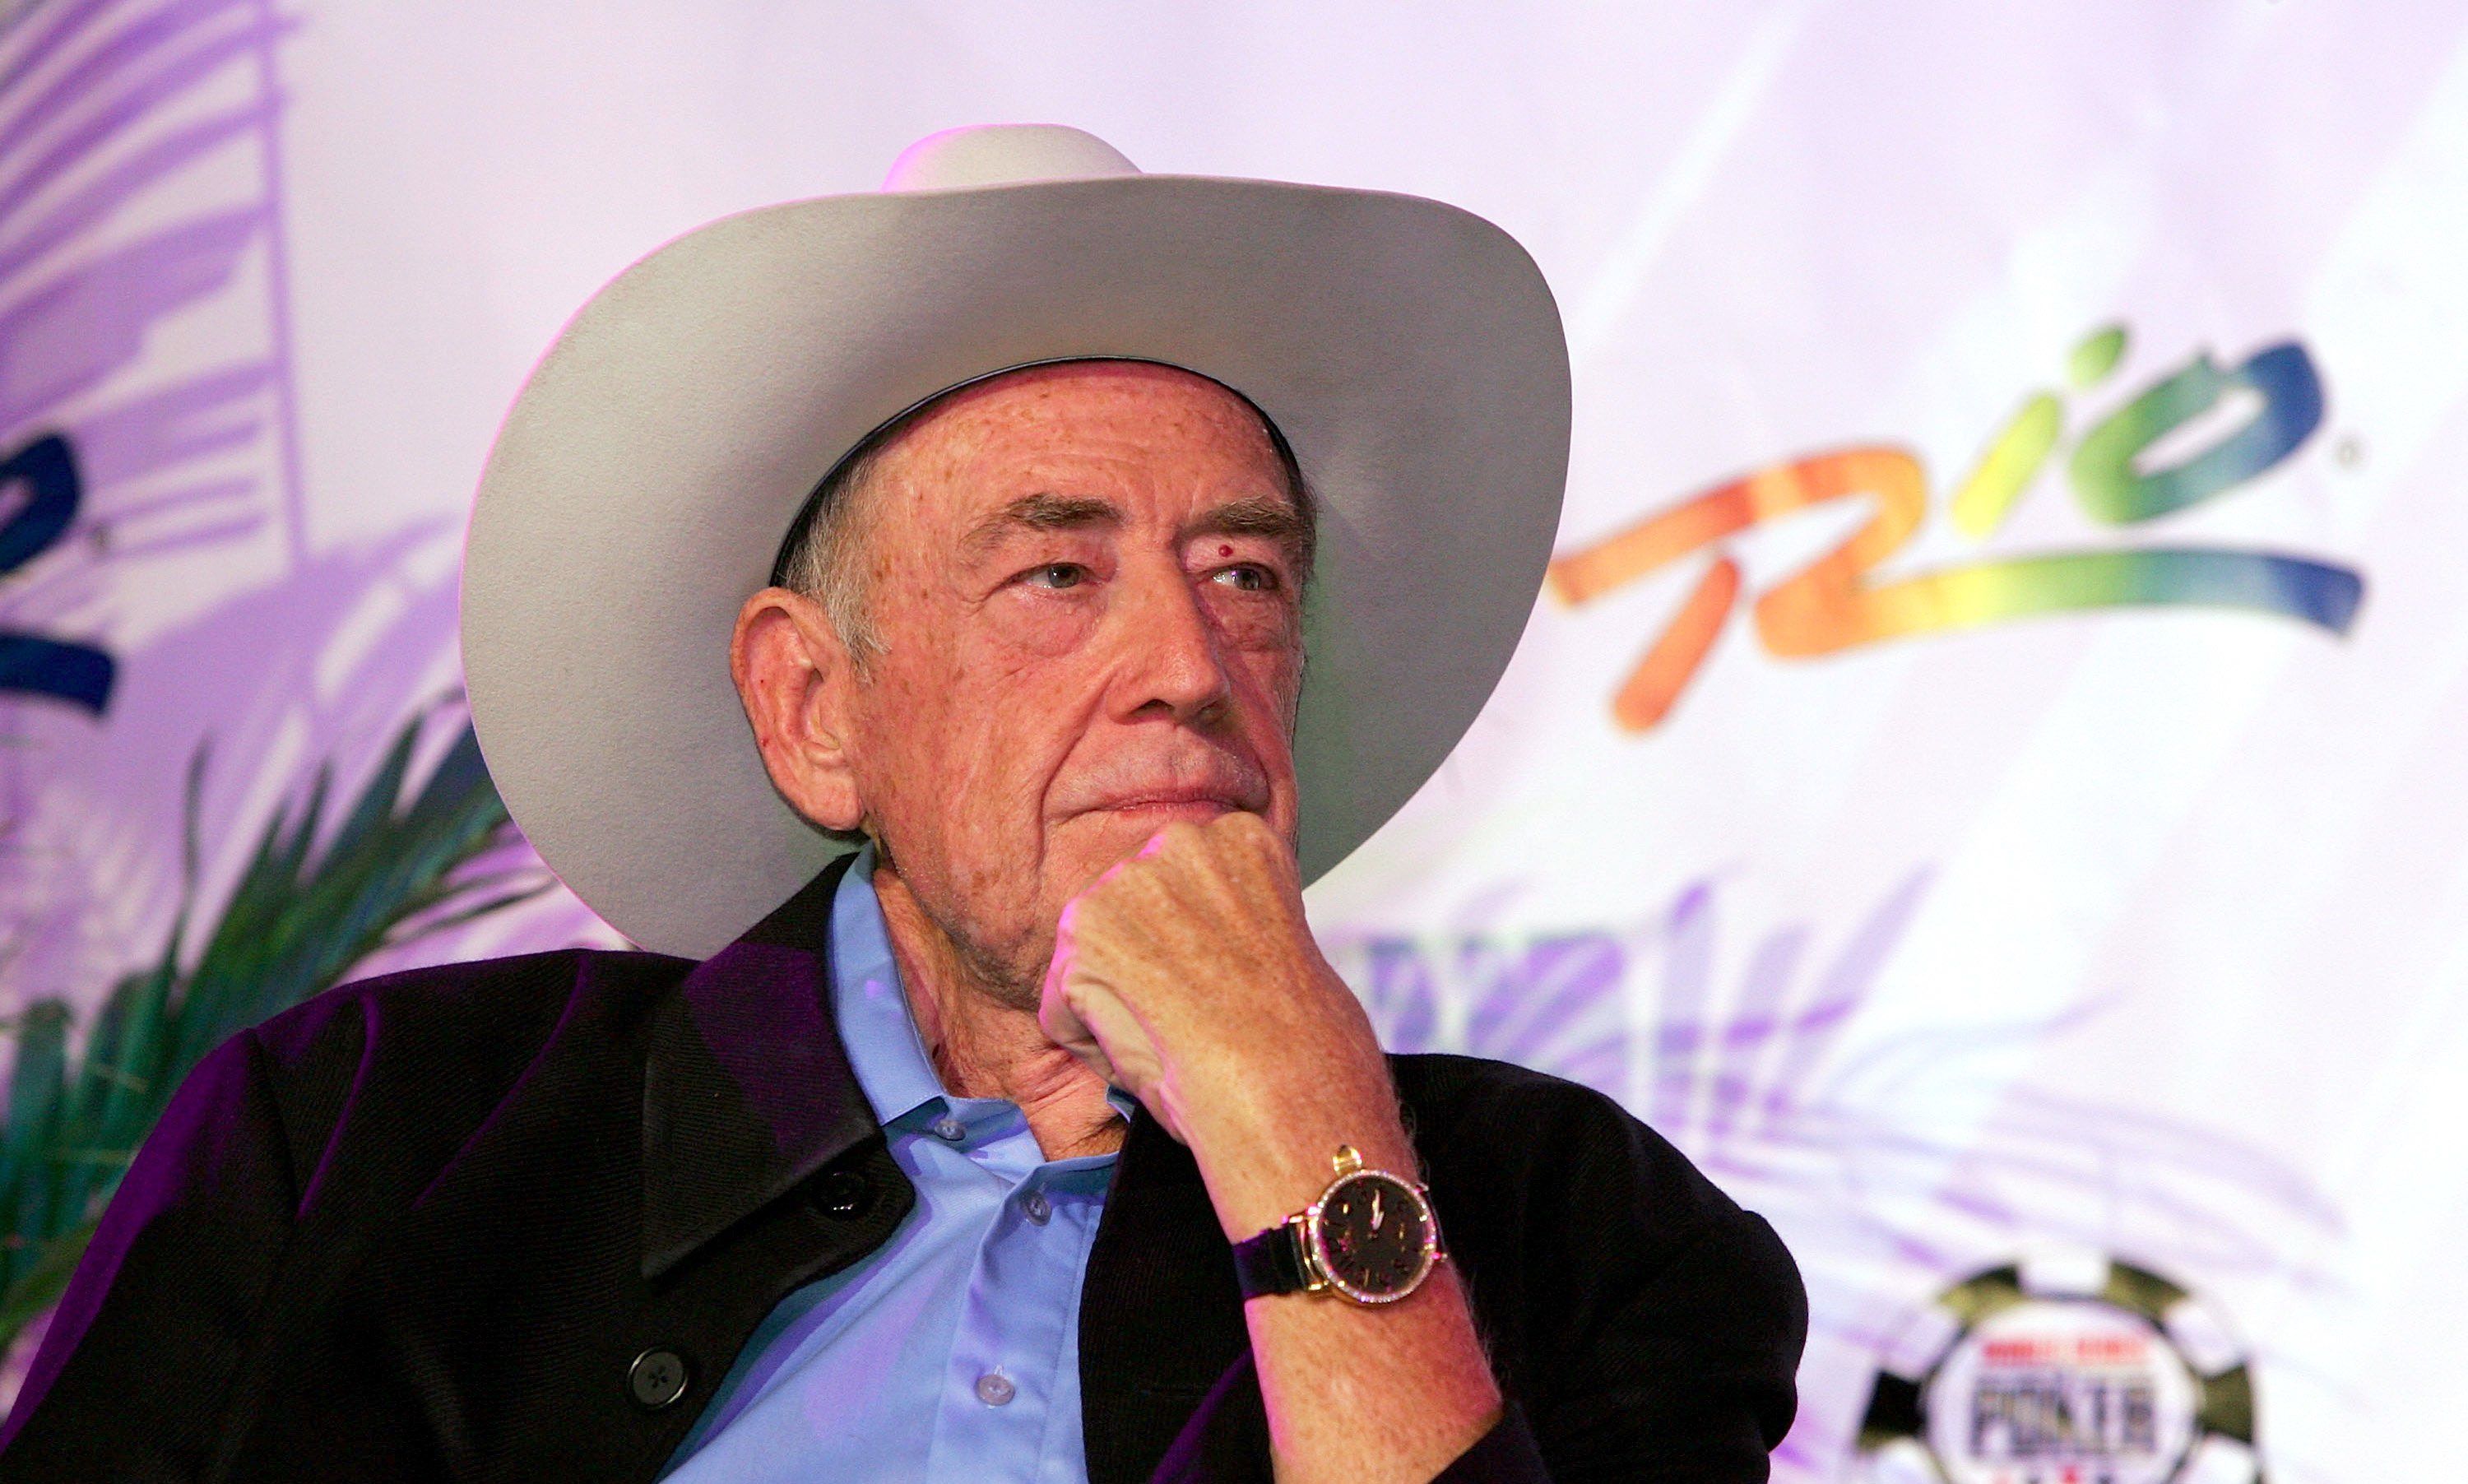 Doyle Brunson wearing a blue polo shirt, black coat, a watch, and a white hat